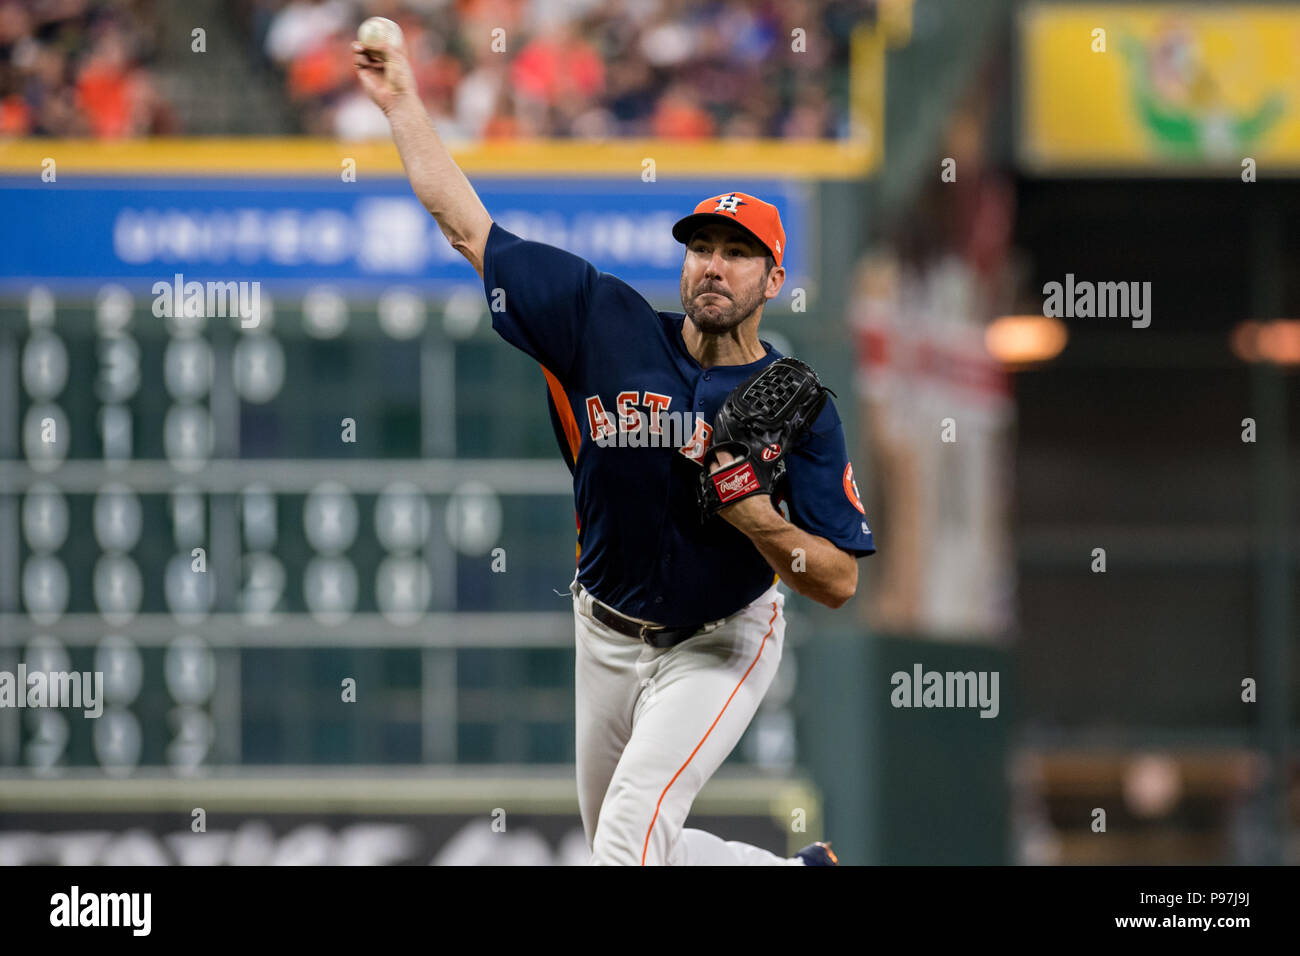 Houston, TX, USA. 15th July, 2018. Houston Astros starting pitcher Justin Verlander (35) pitches during a Major League Baseball game between the Houston Astros and the Detroit Tigers at Minute Maid Park in Houston, TX. The Tigers won the game 6 to 3.Trask Smith/CSM/Alamy Live News Stock Photo